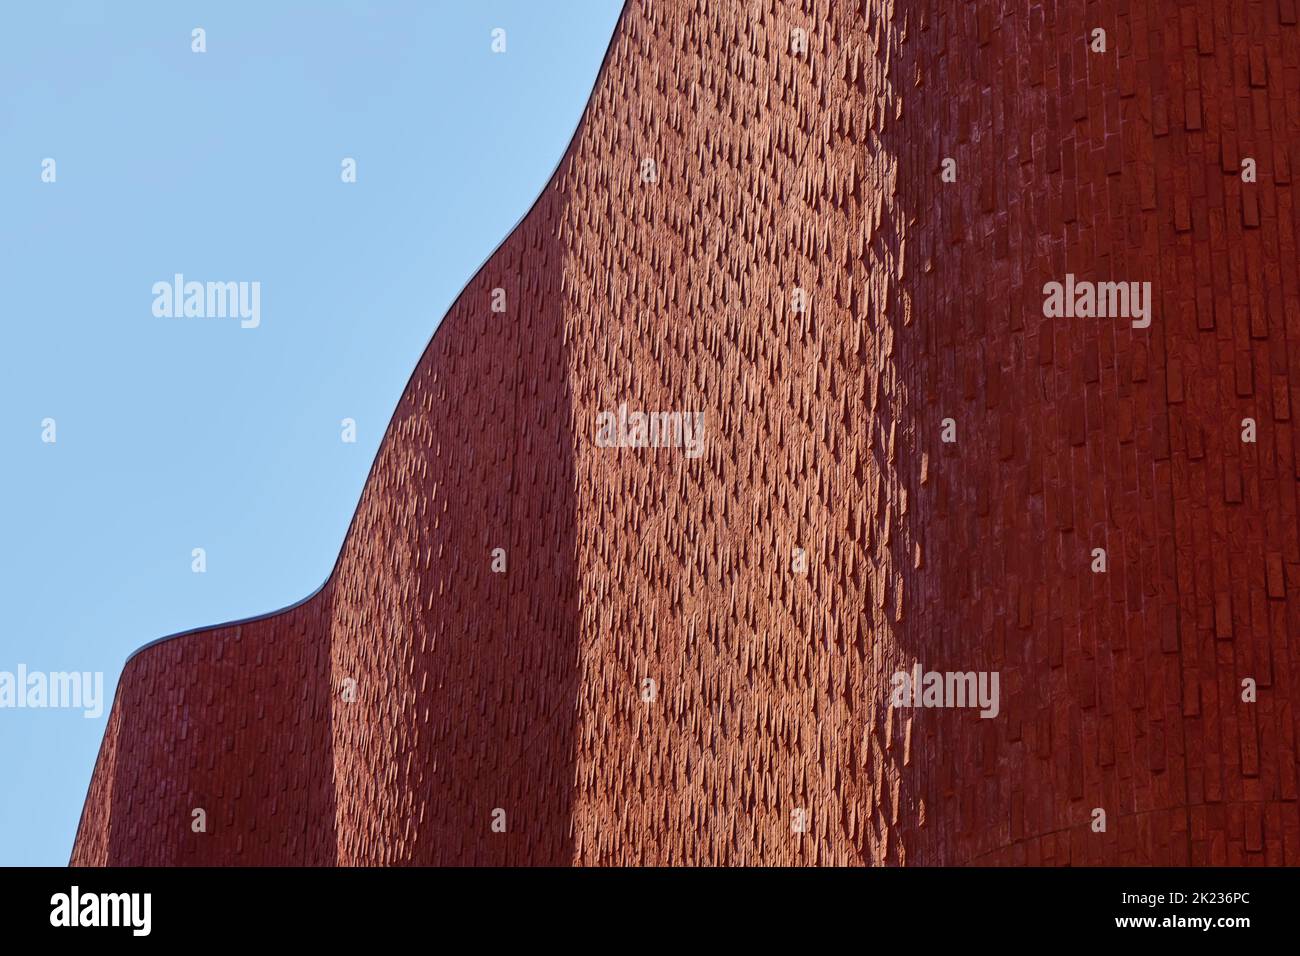 Red brown wavy brick wall of modern architecture with light and shadow under a blue sky in summer. Stock Photo